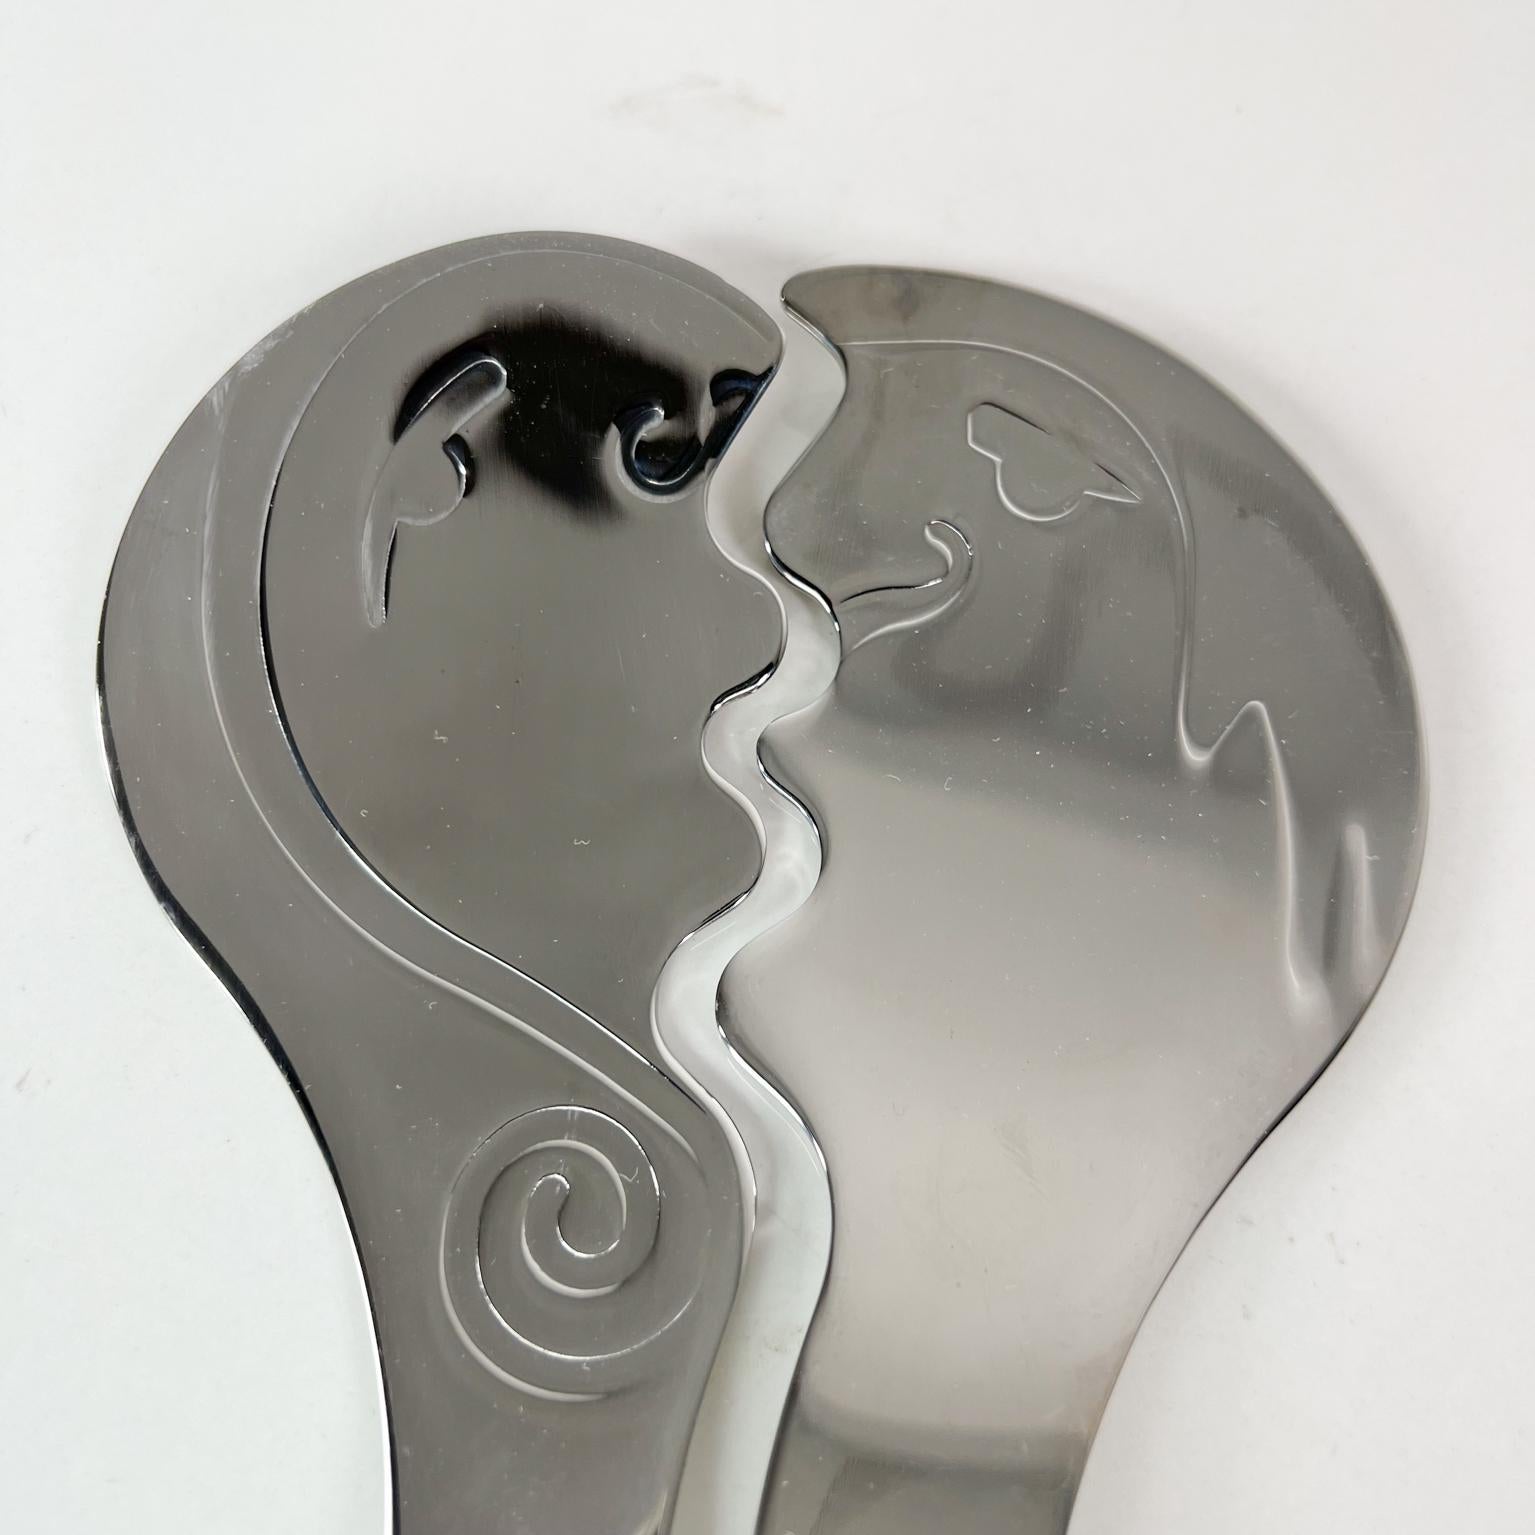 Stainless Steel Sensual Kiss Salad Server Set in Stainless by Carrol Boyes Original Box